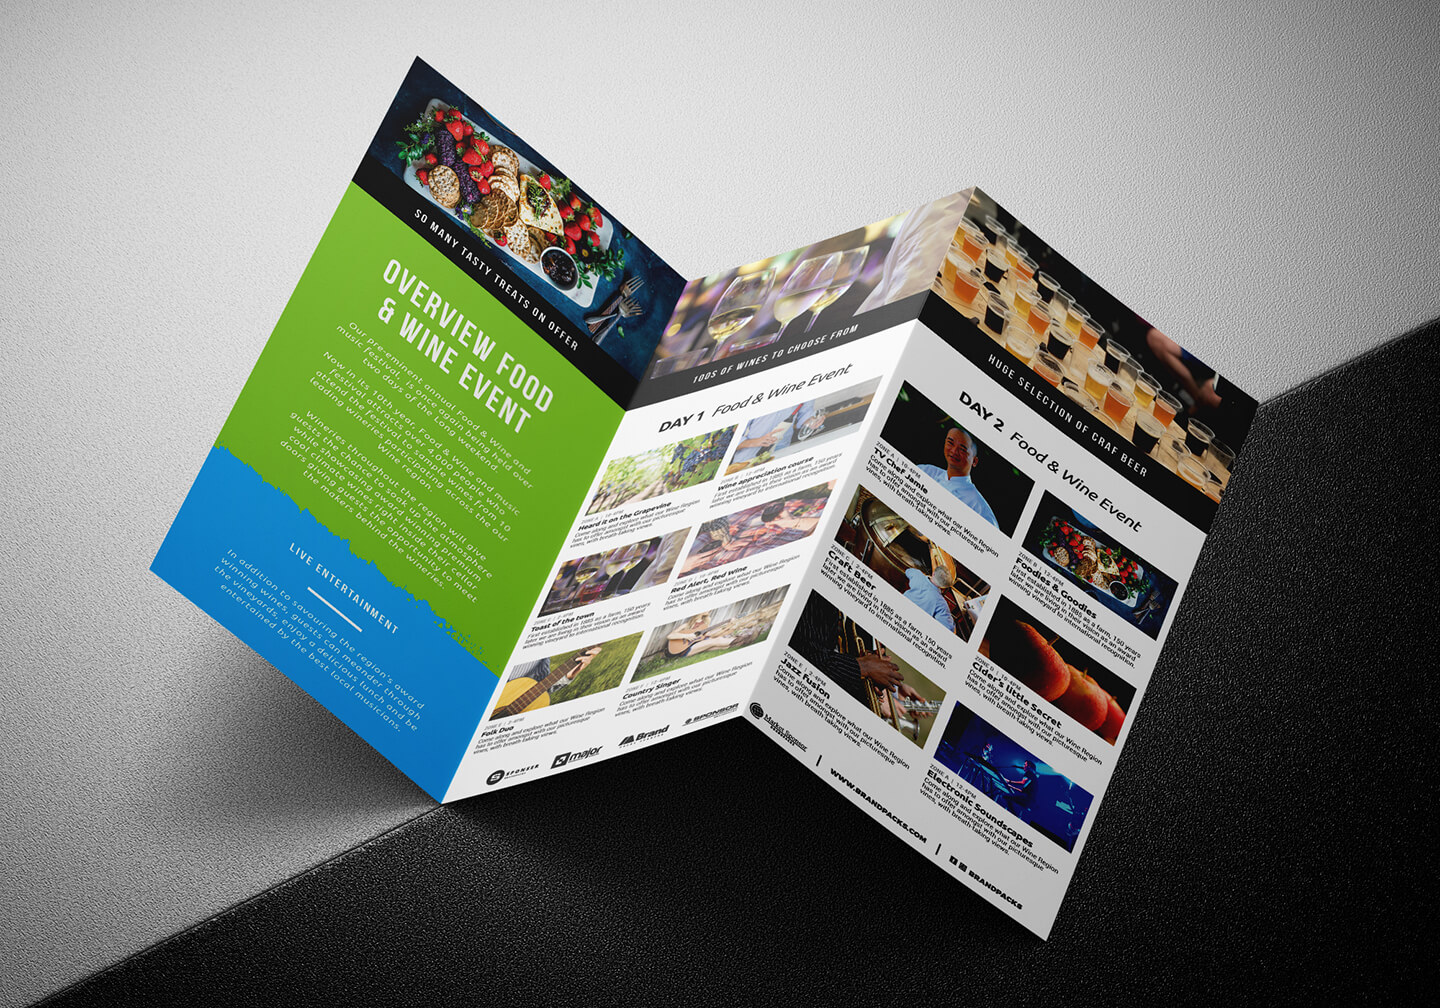 Free Tri Fold Brochure Template For Events & Festivals – Psd Intended For Adobe Illustrator Tri Fold Brochure Template